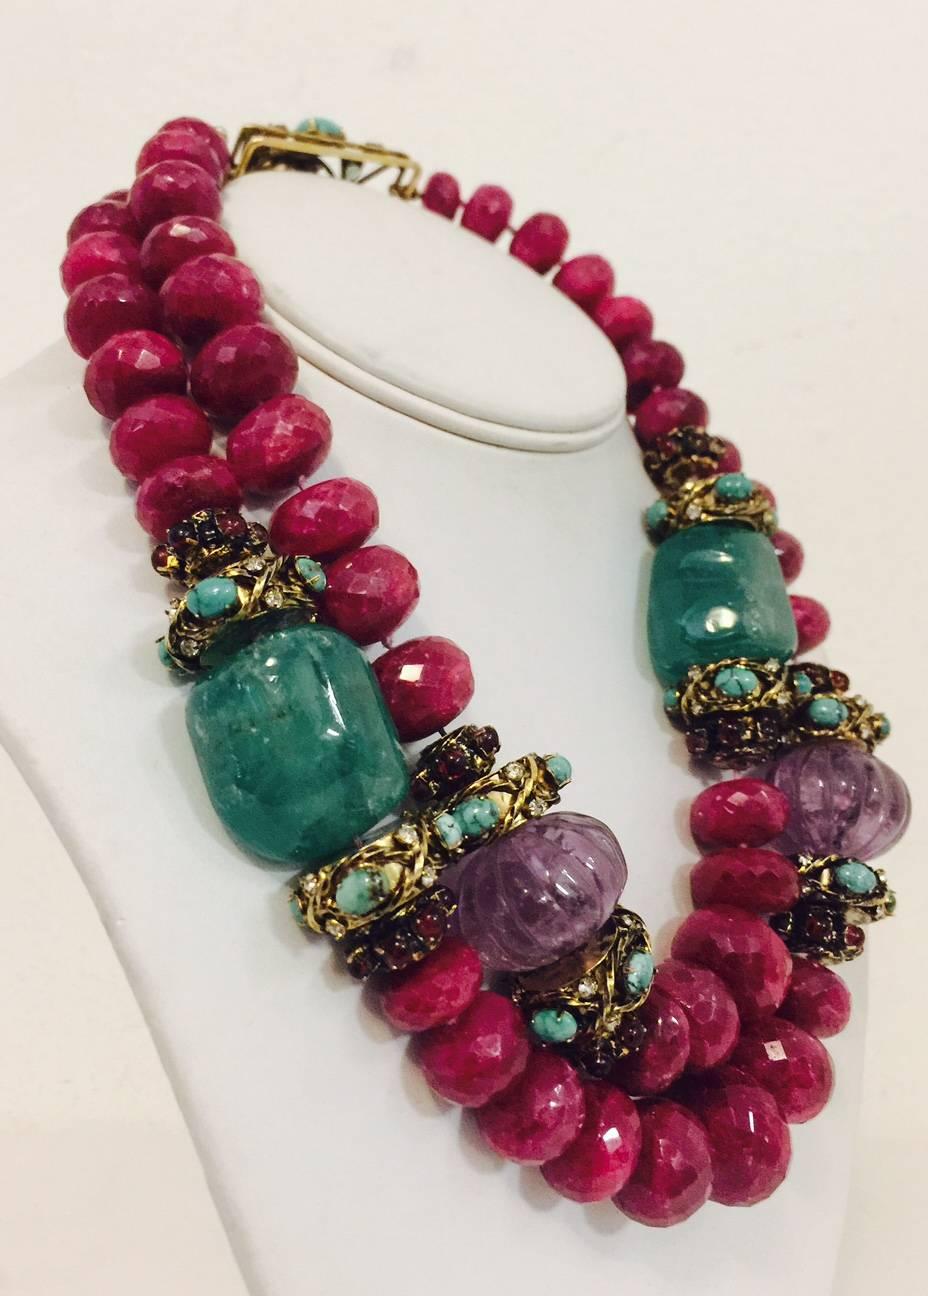 Every Iradj Moini design is one of a kind.  This important piece was designed as two rows of graduated, faceted ruby beads, spaced by large tumbled natural emeralds and textured blackened yellow metal spacers, set with cabochon turqouise, red glass